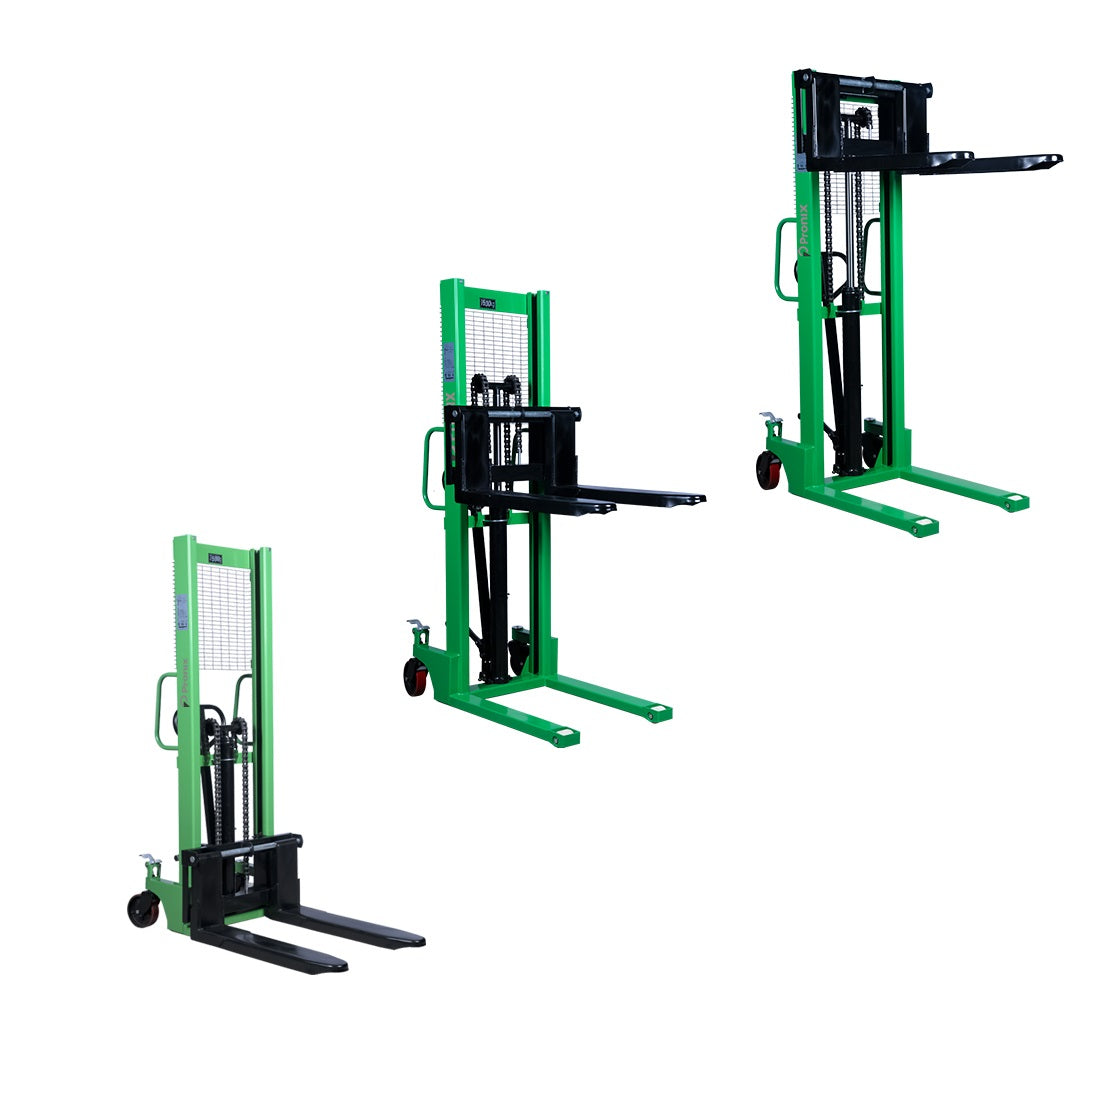 Pronix Manual Stacker 1.5 Ton With 1.6m Lift Height PNXMS-1516